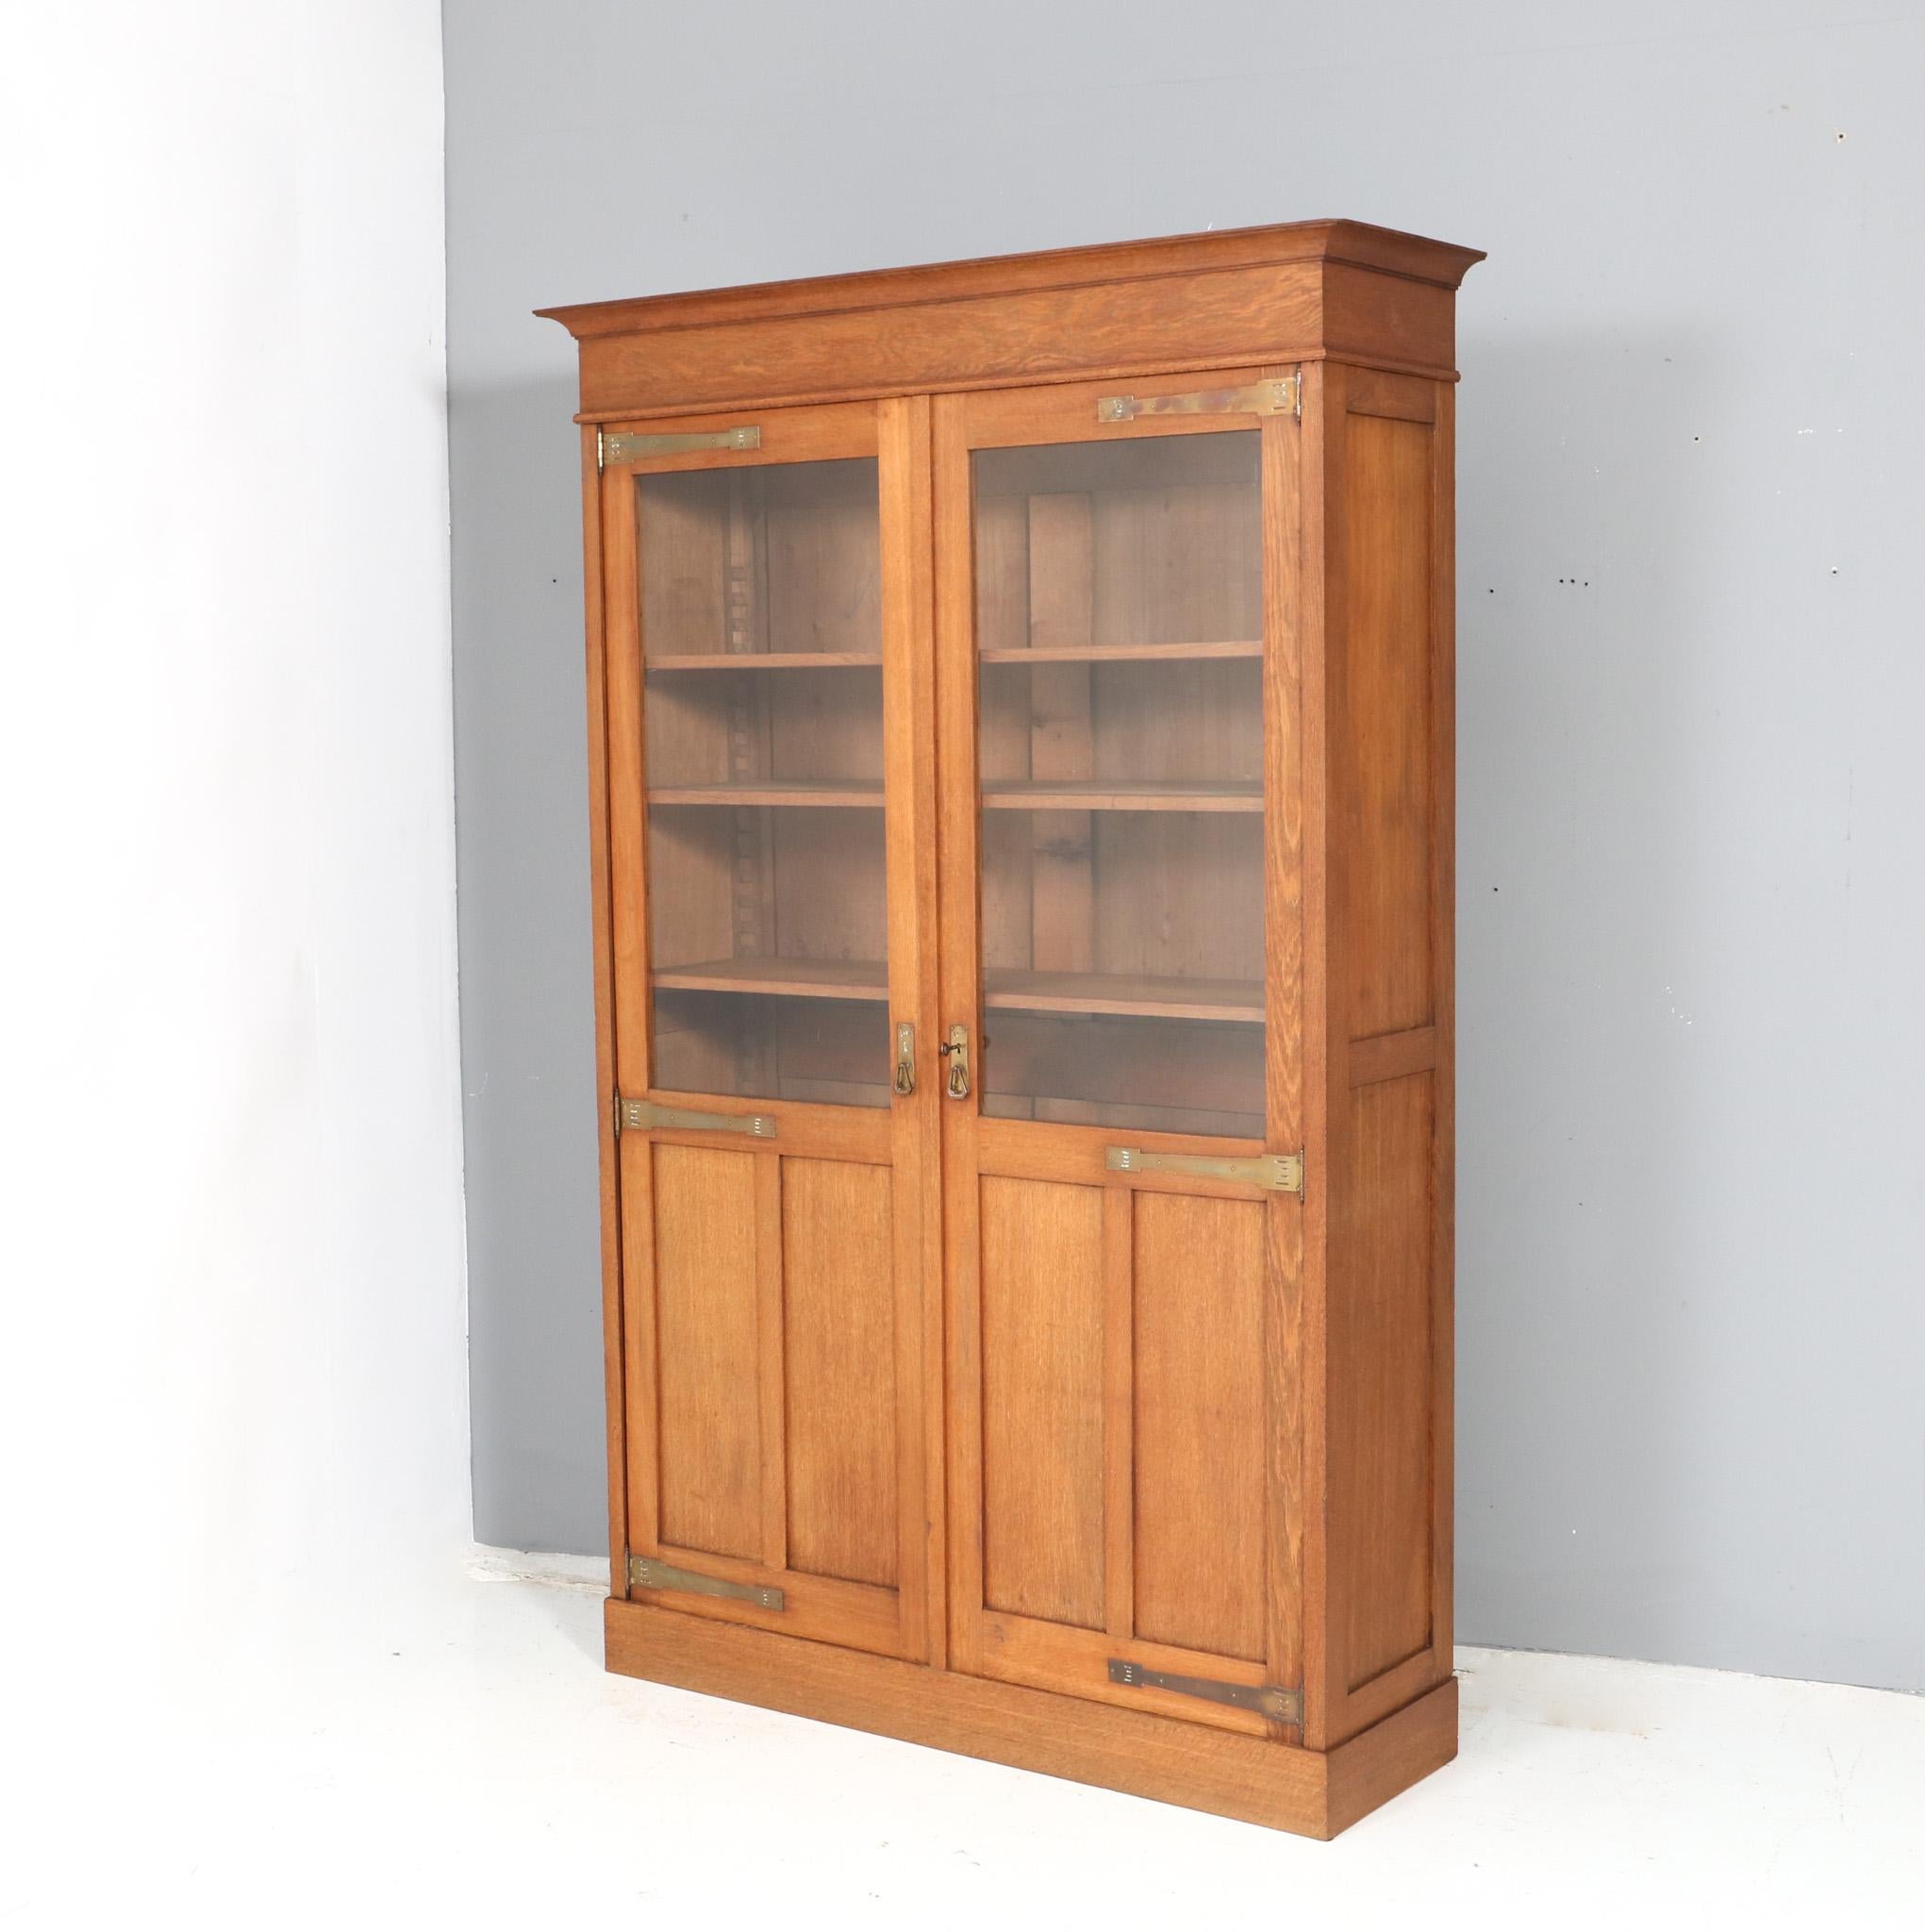 Magnificent and rare Arts & Crafts Art Nouveau bookcase.
Striking Dutch design from the 1900s.
Solid oak base with original patinated brass handles and hinges.
Six original wooden shelves, adjustable in height.
This wonderful Arts & Crafts Art